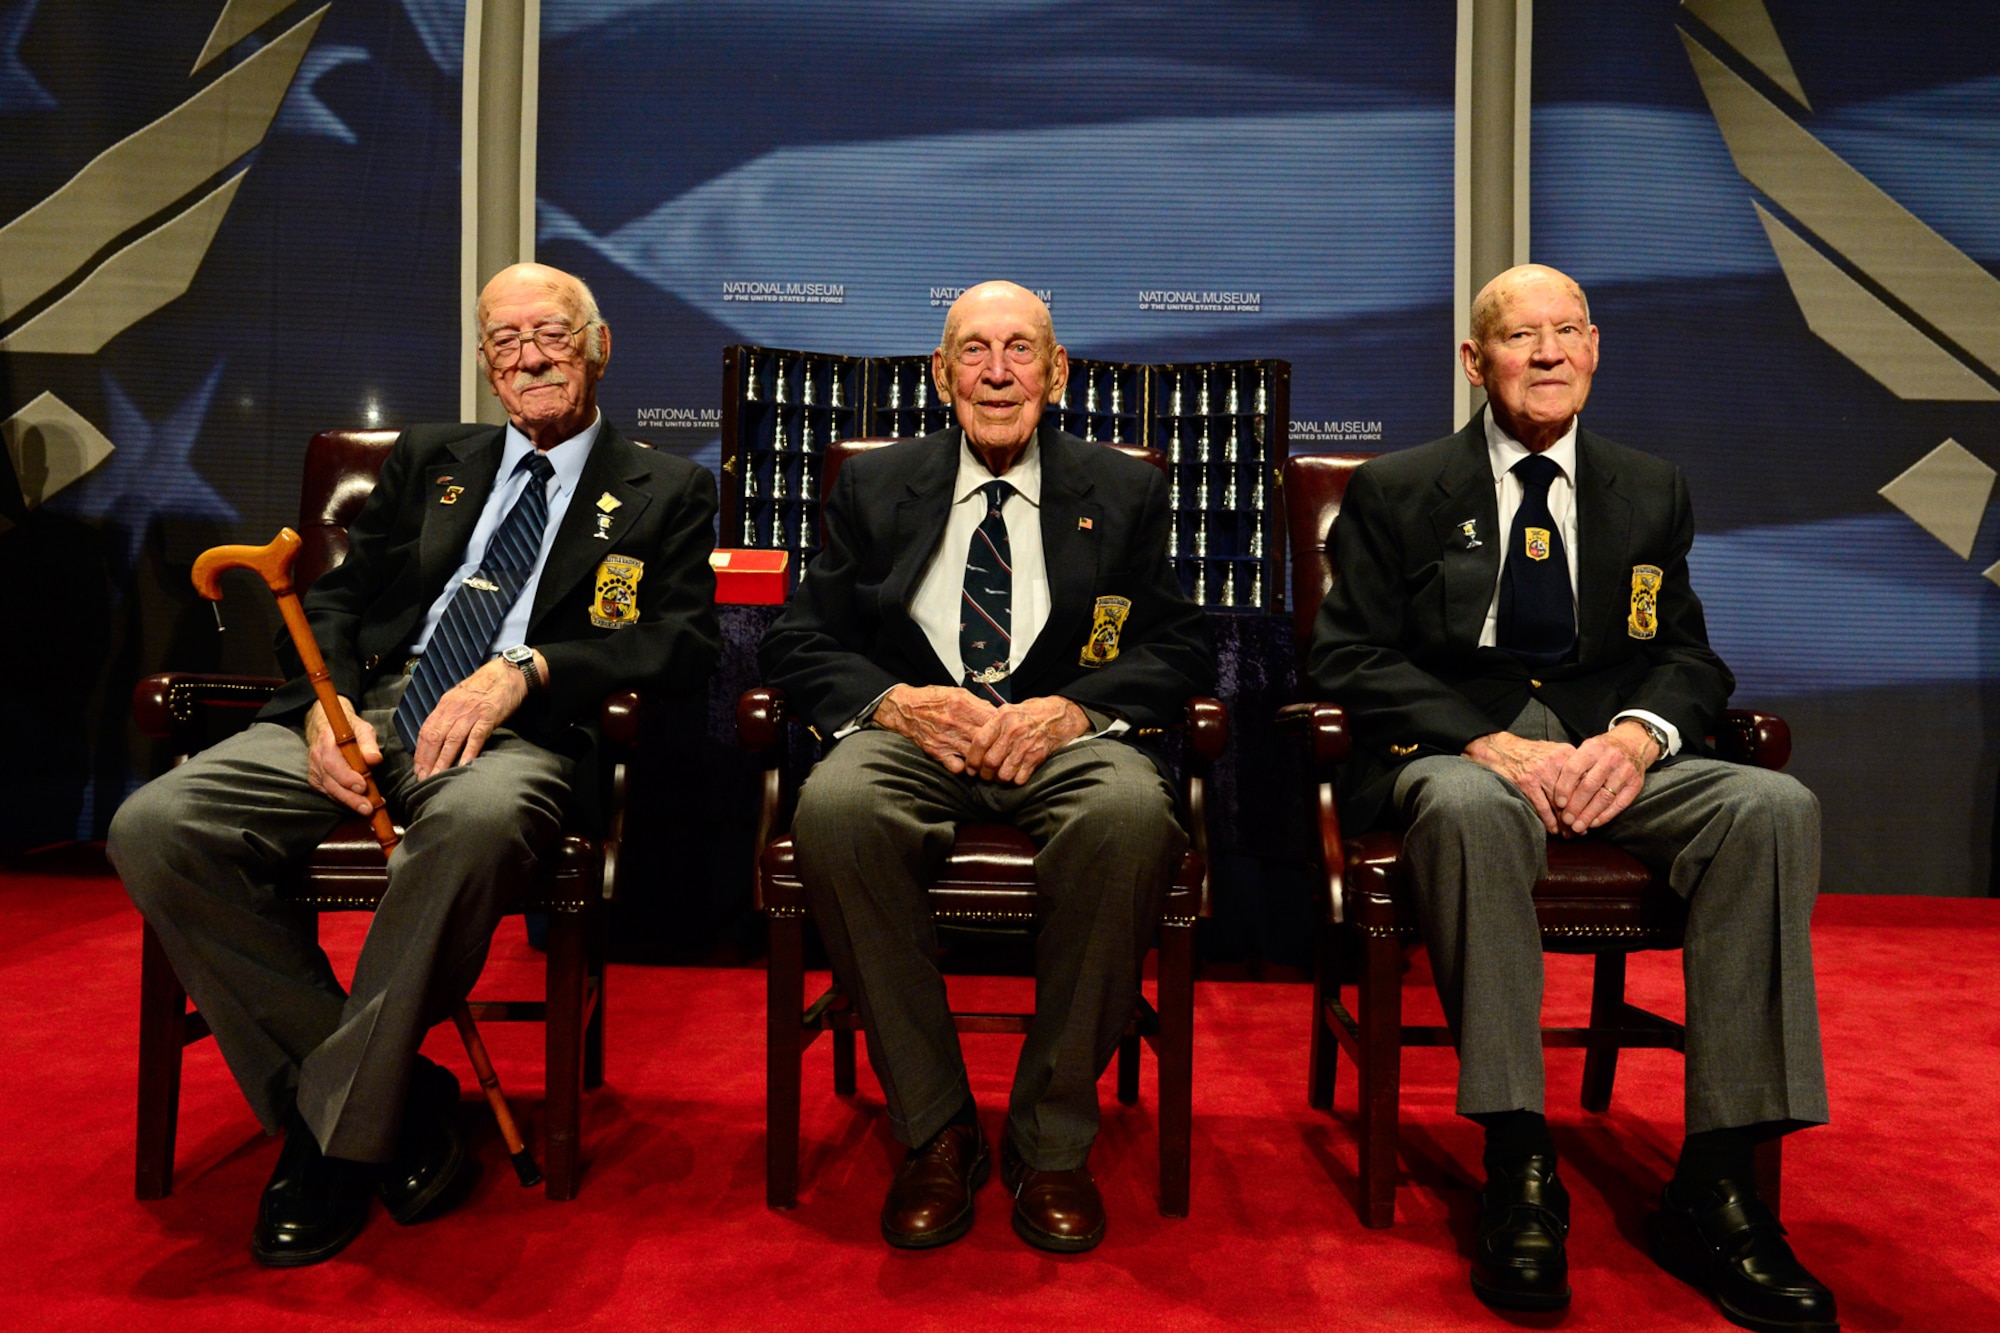 The Doolittle Tokyo Raiders after sharing their last and final toast at the National Museum of the U.S. Air Force Nov. 09, 2013 in Dayton, Ohio.(From left to right) Lt. Col. Edward J. Saylor, Lt. Col. Richard E. Cole, and Staff Sgt. David J. Thatcher.  (U.S. Air Force photo/Desiree N. Palacios)